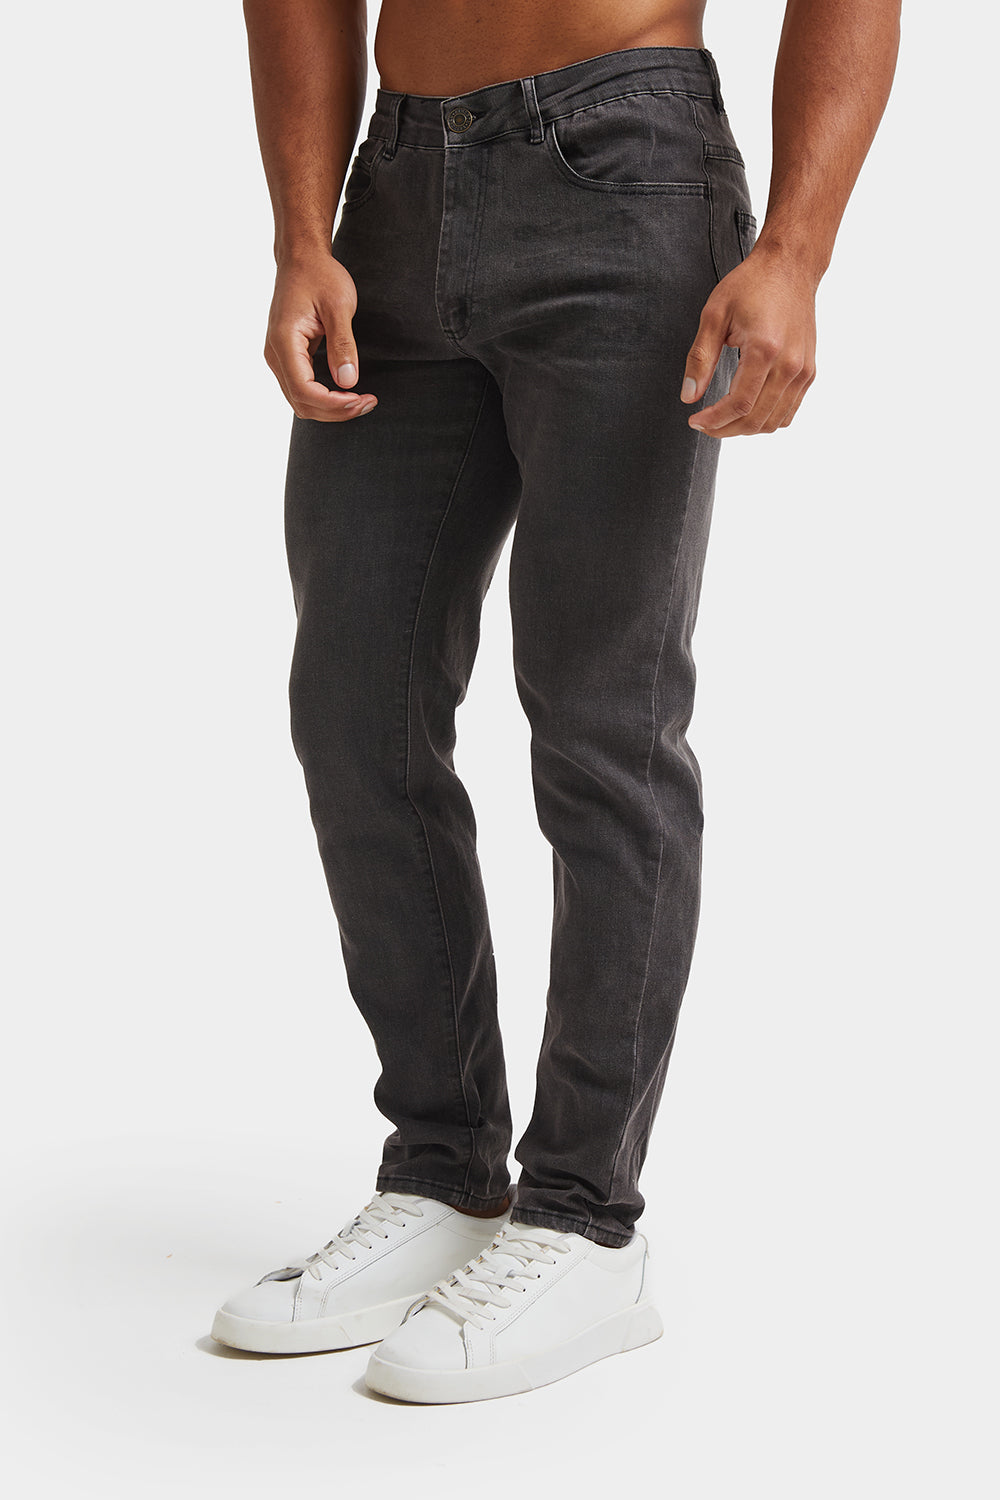 Courage Straight Leg Jeans In Mid Grey Urban – 34 Heritage